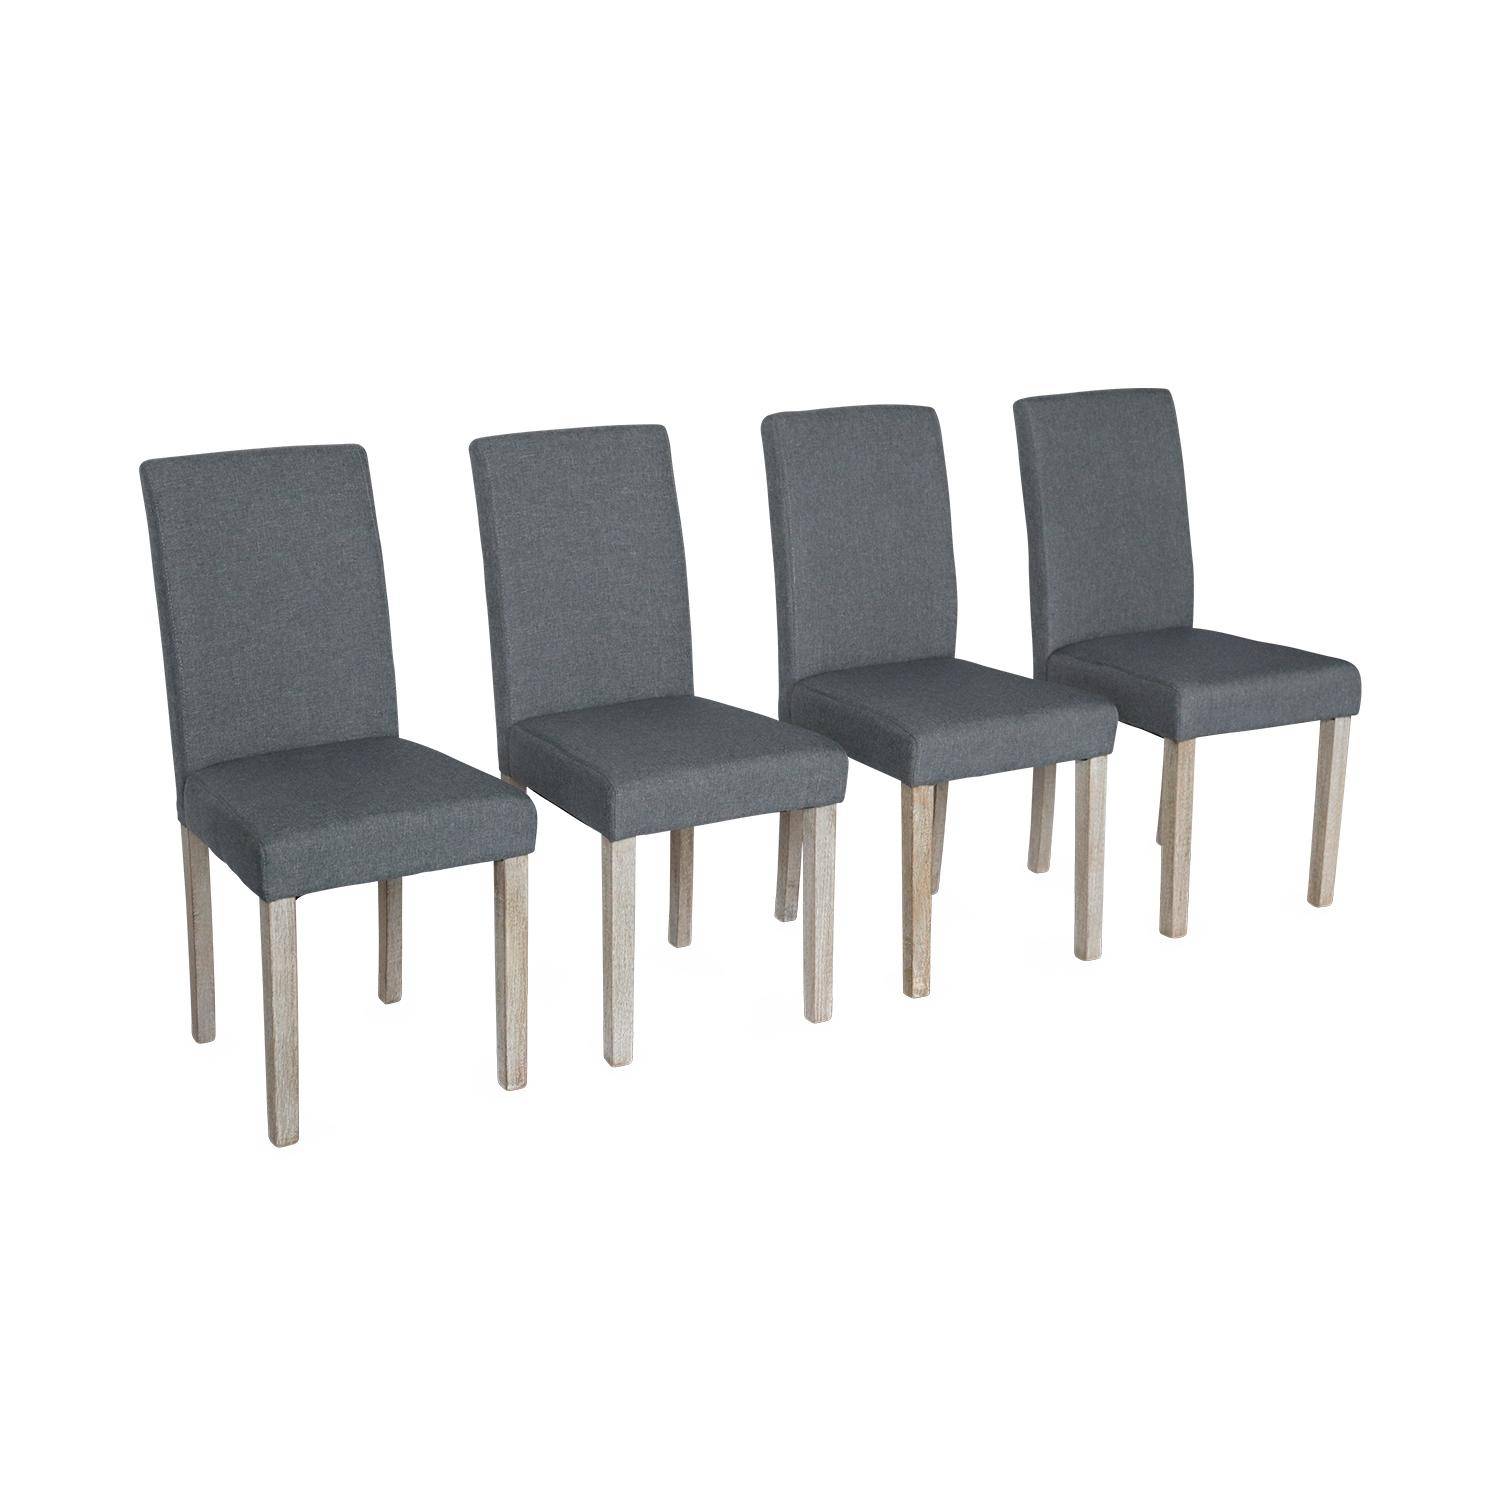 Set of 4 fabric dining chairs with wooden legs - Rita - Charcoal grey,sweeek,Photo3